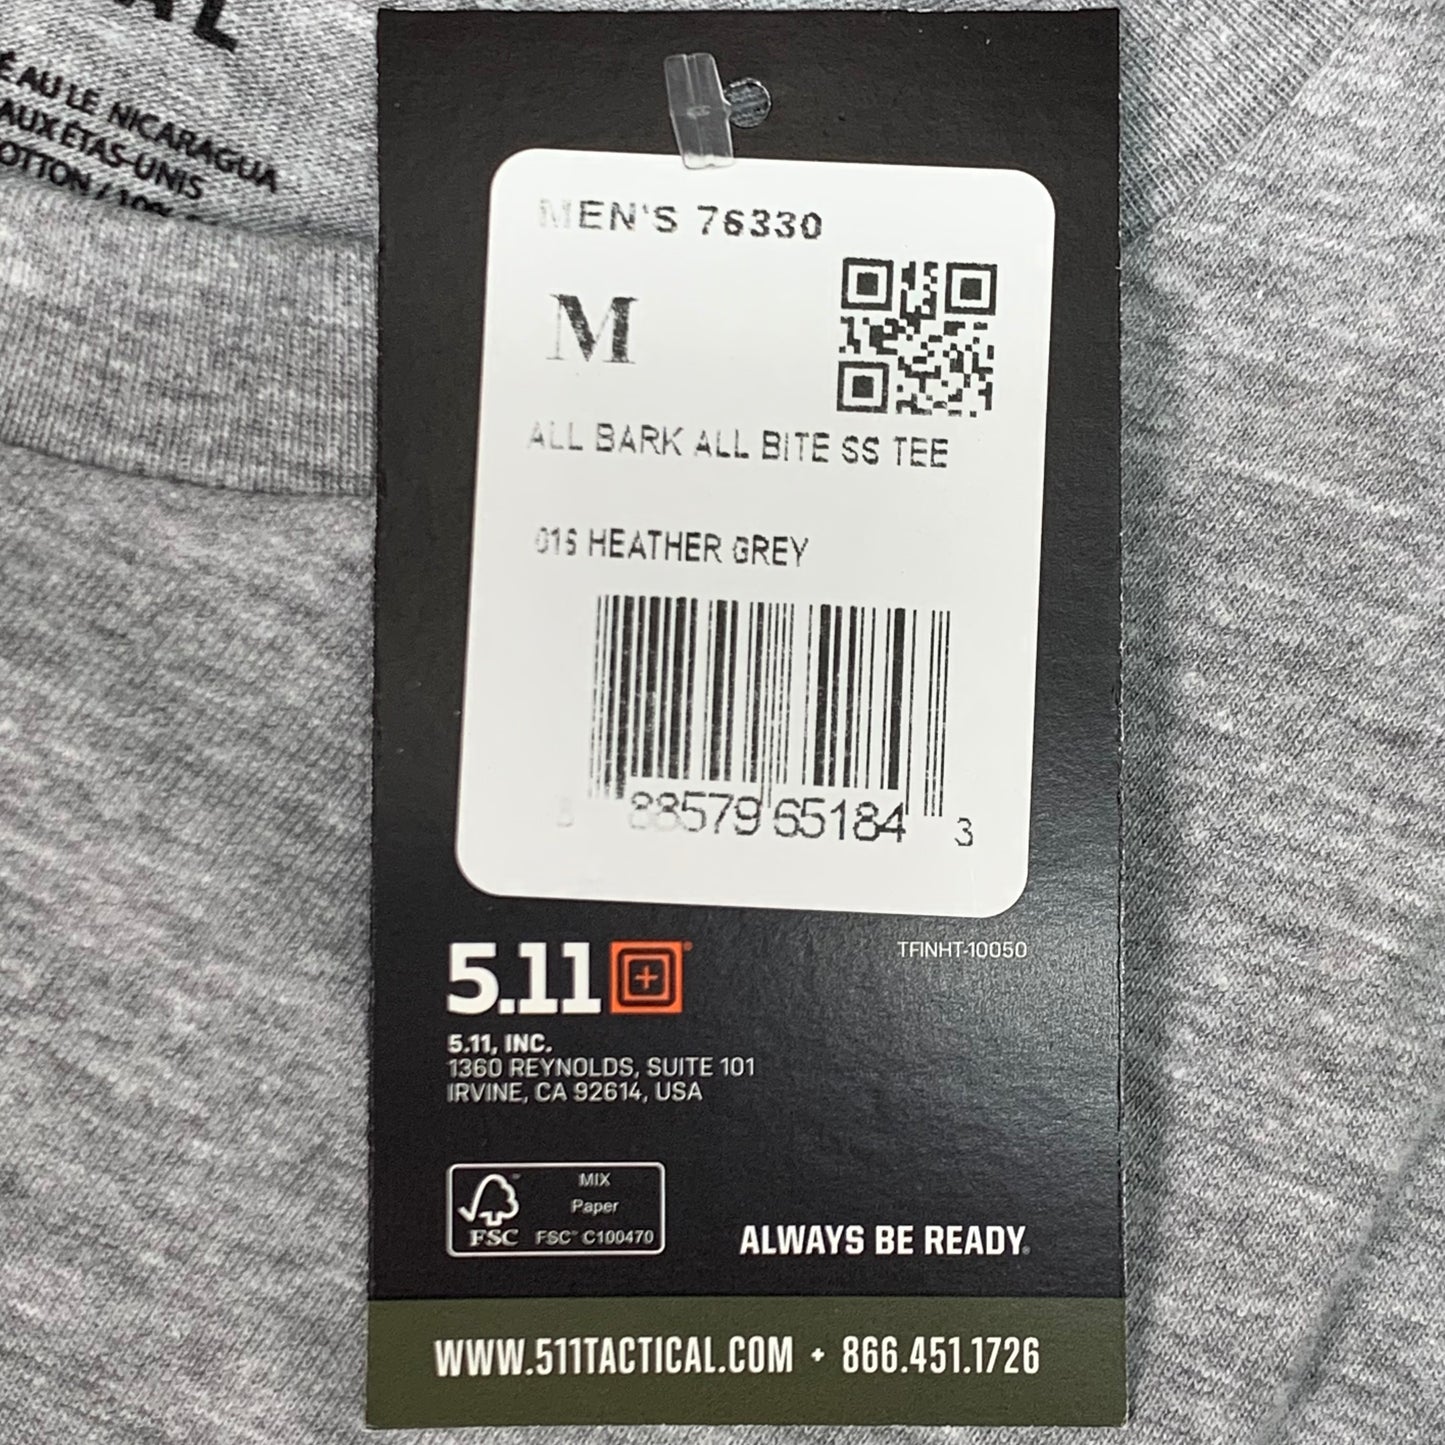 5.11 TACTICAL All Bark All Bite T-Shirt Cotton Polyester 016 Heather Grey Sz M #76330